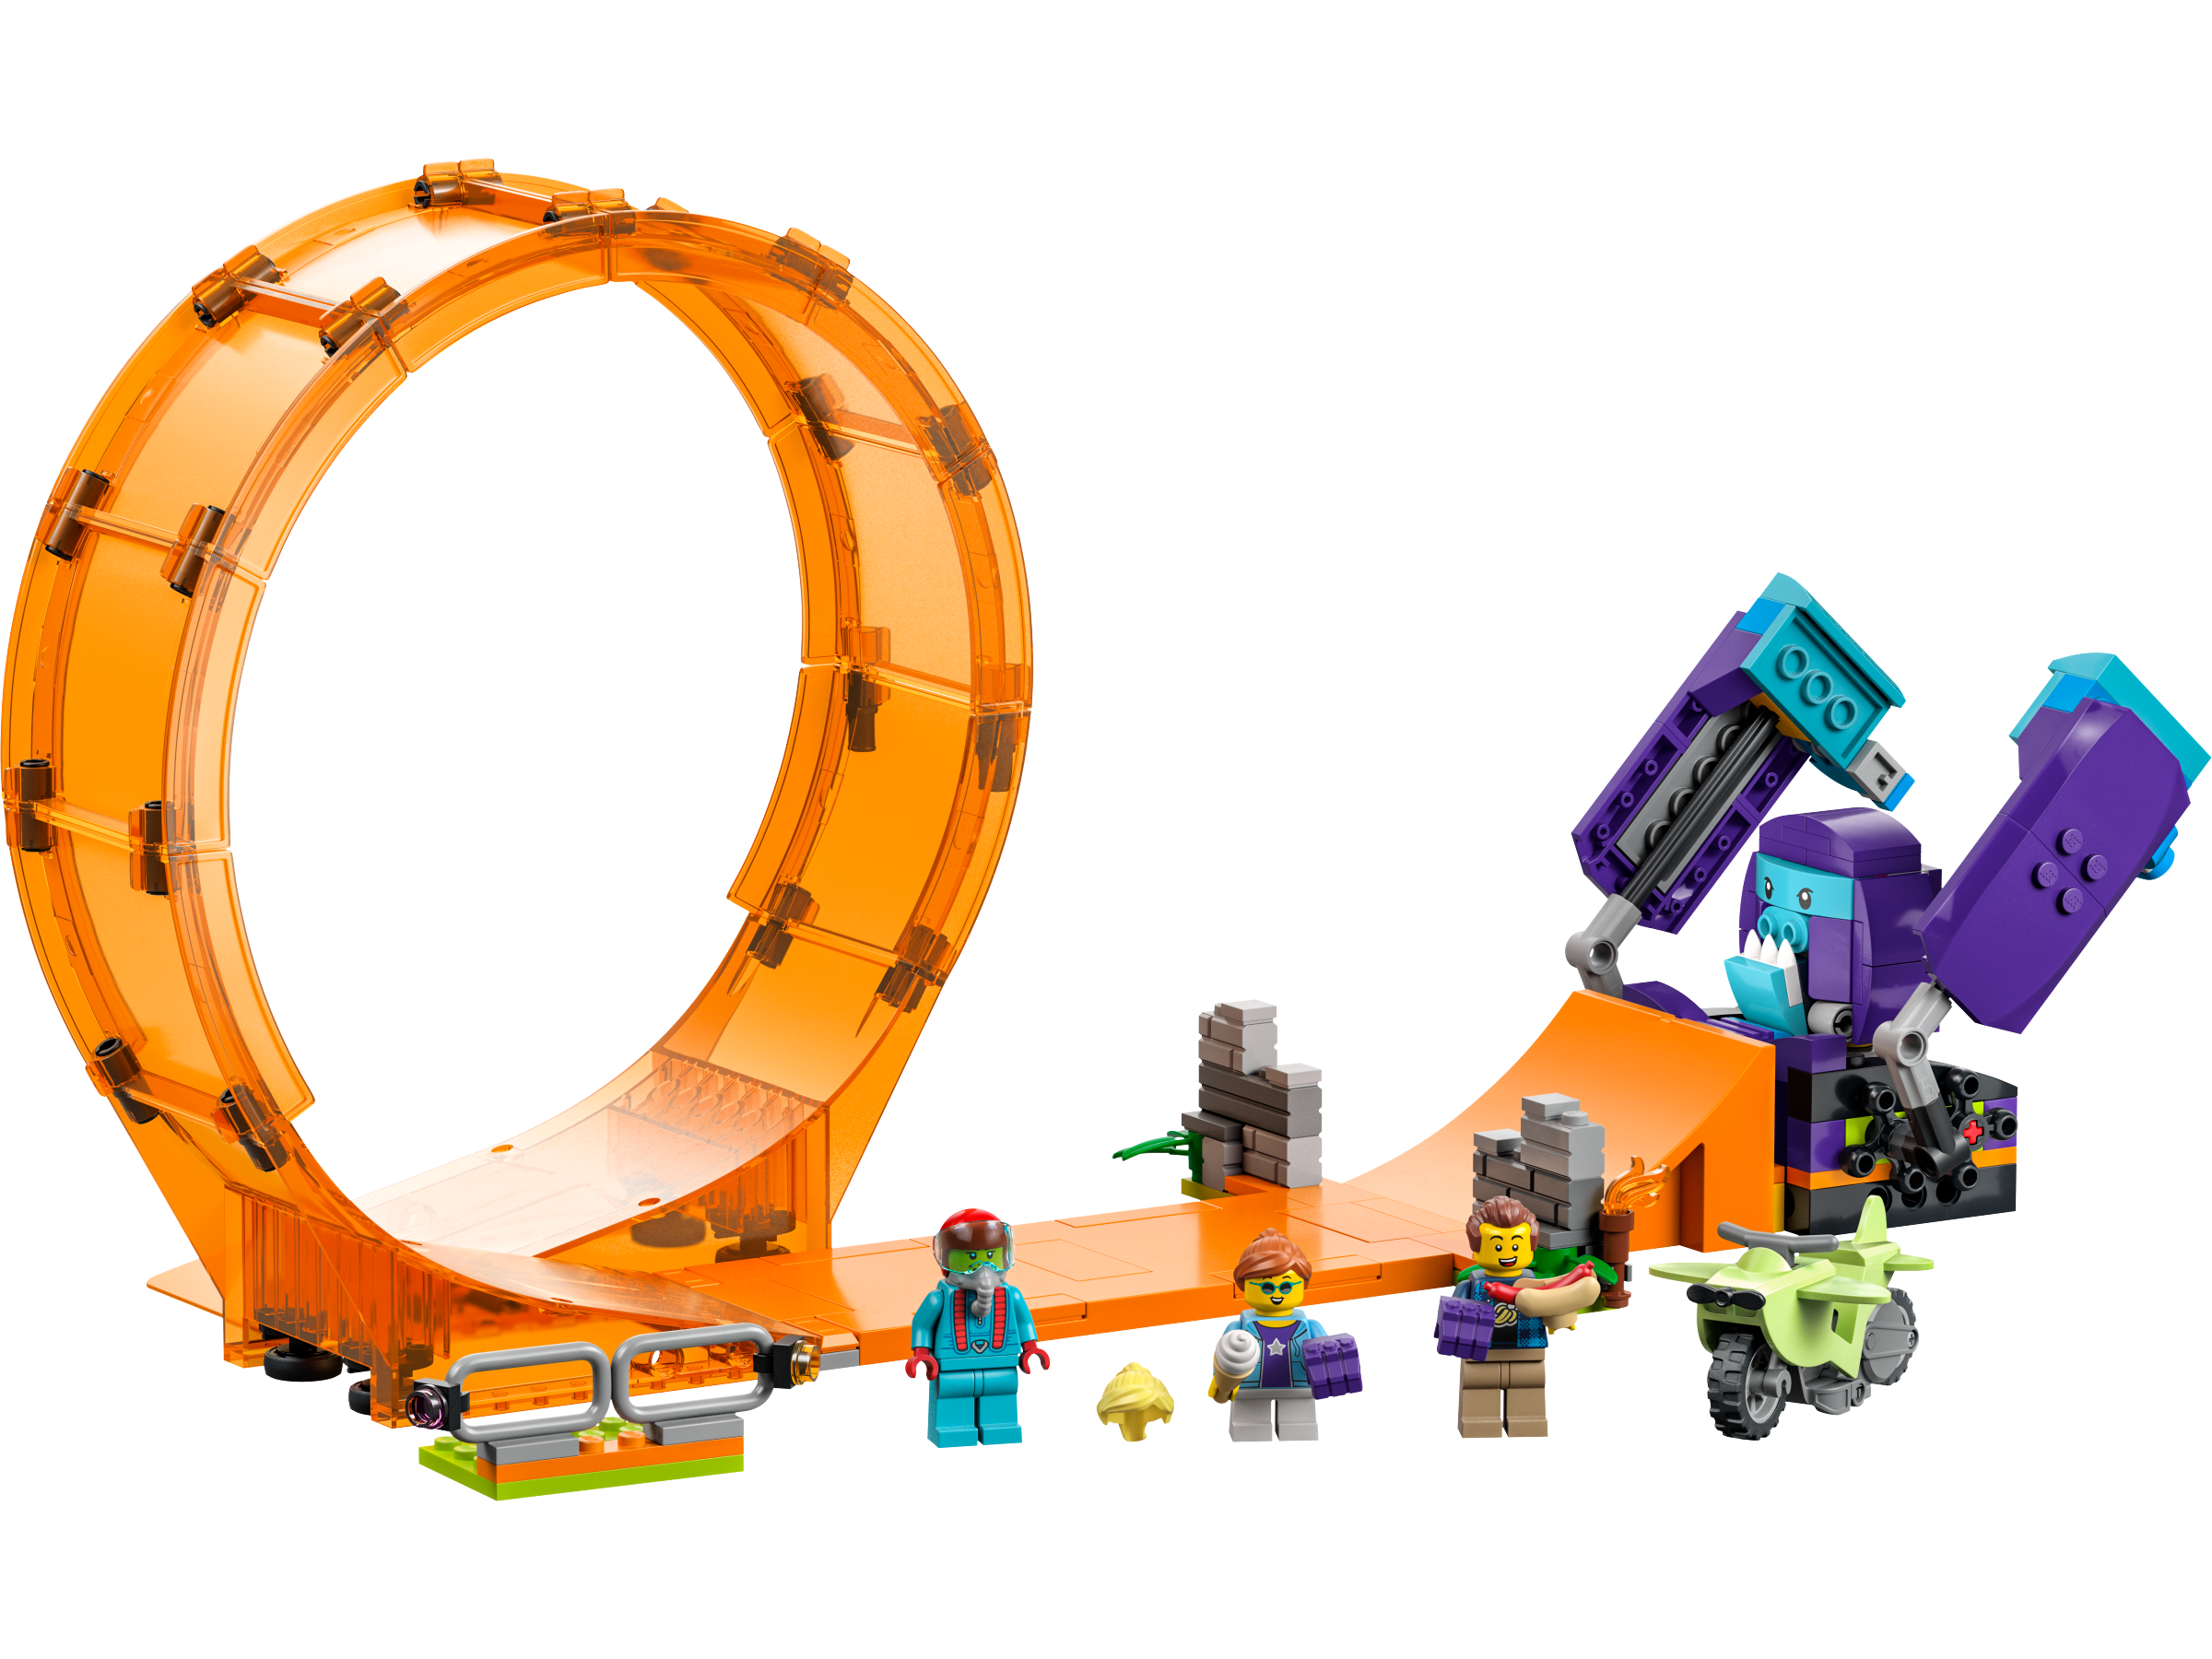 Smashing Chimpanzee Stunt Loop 60338 the Buy | LEGO® Shop online US at Official City 